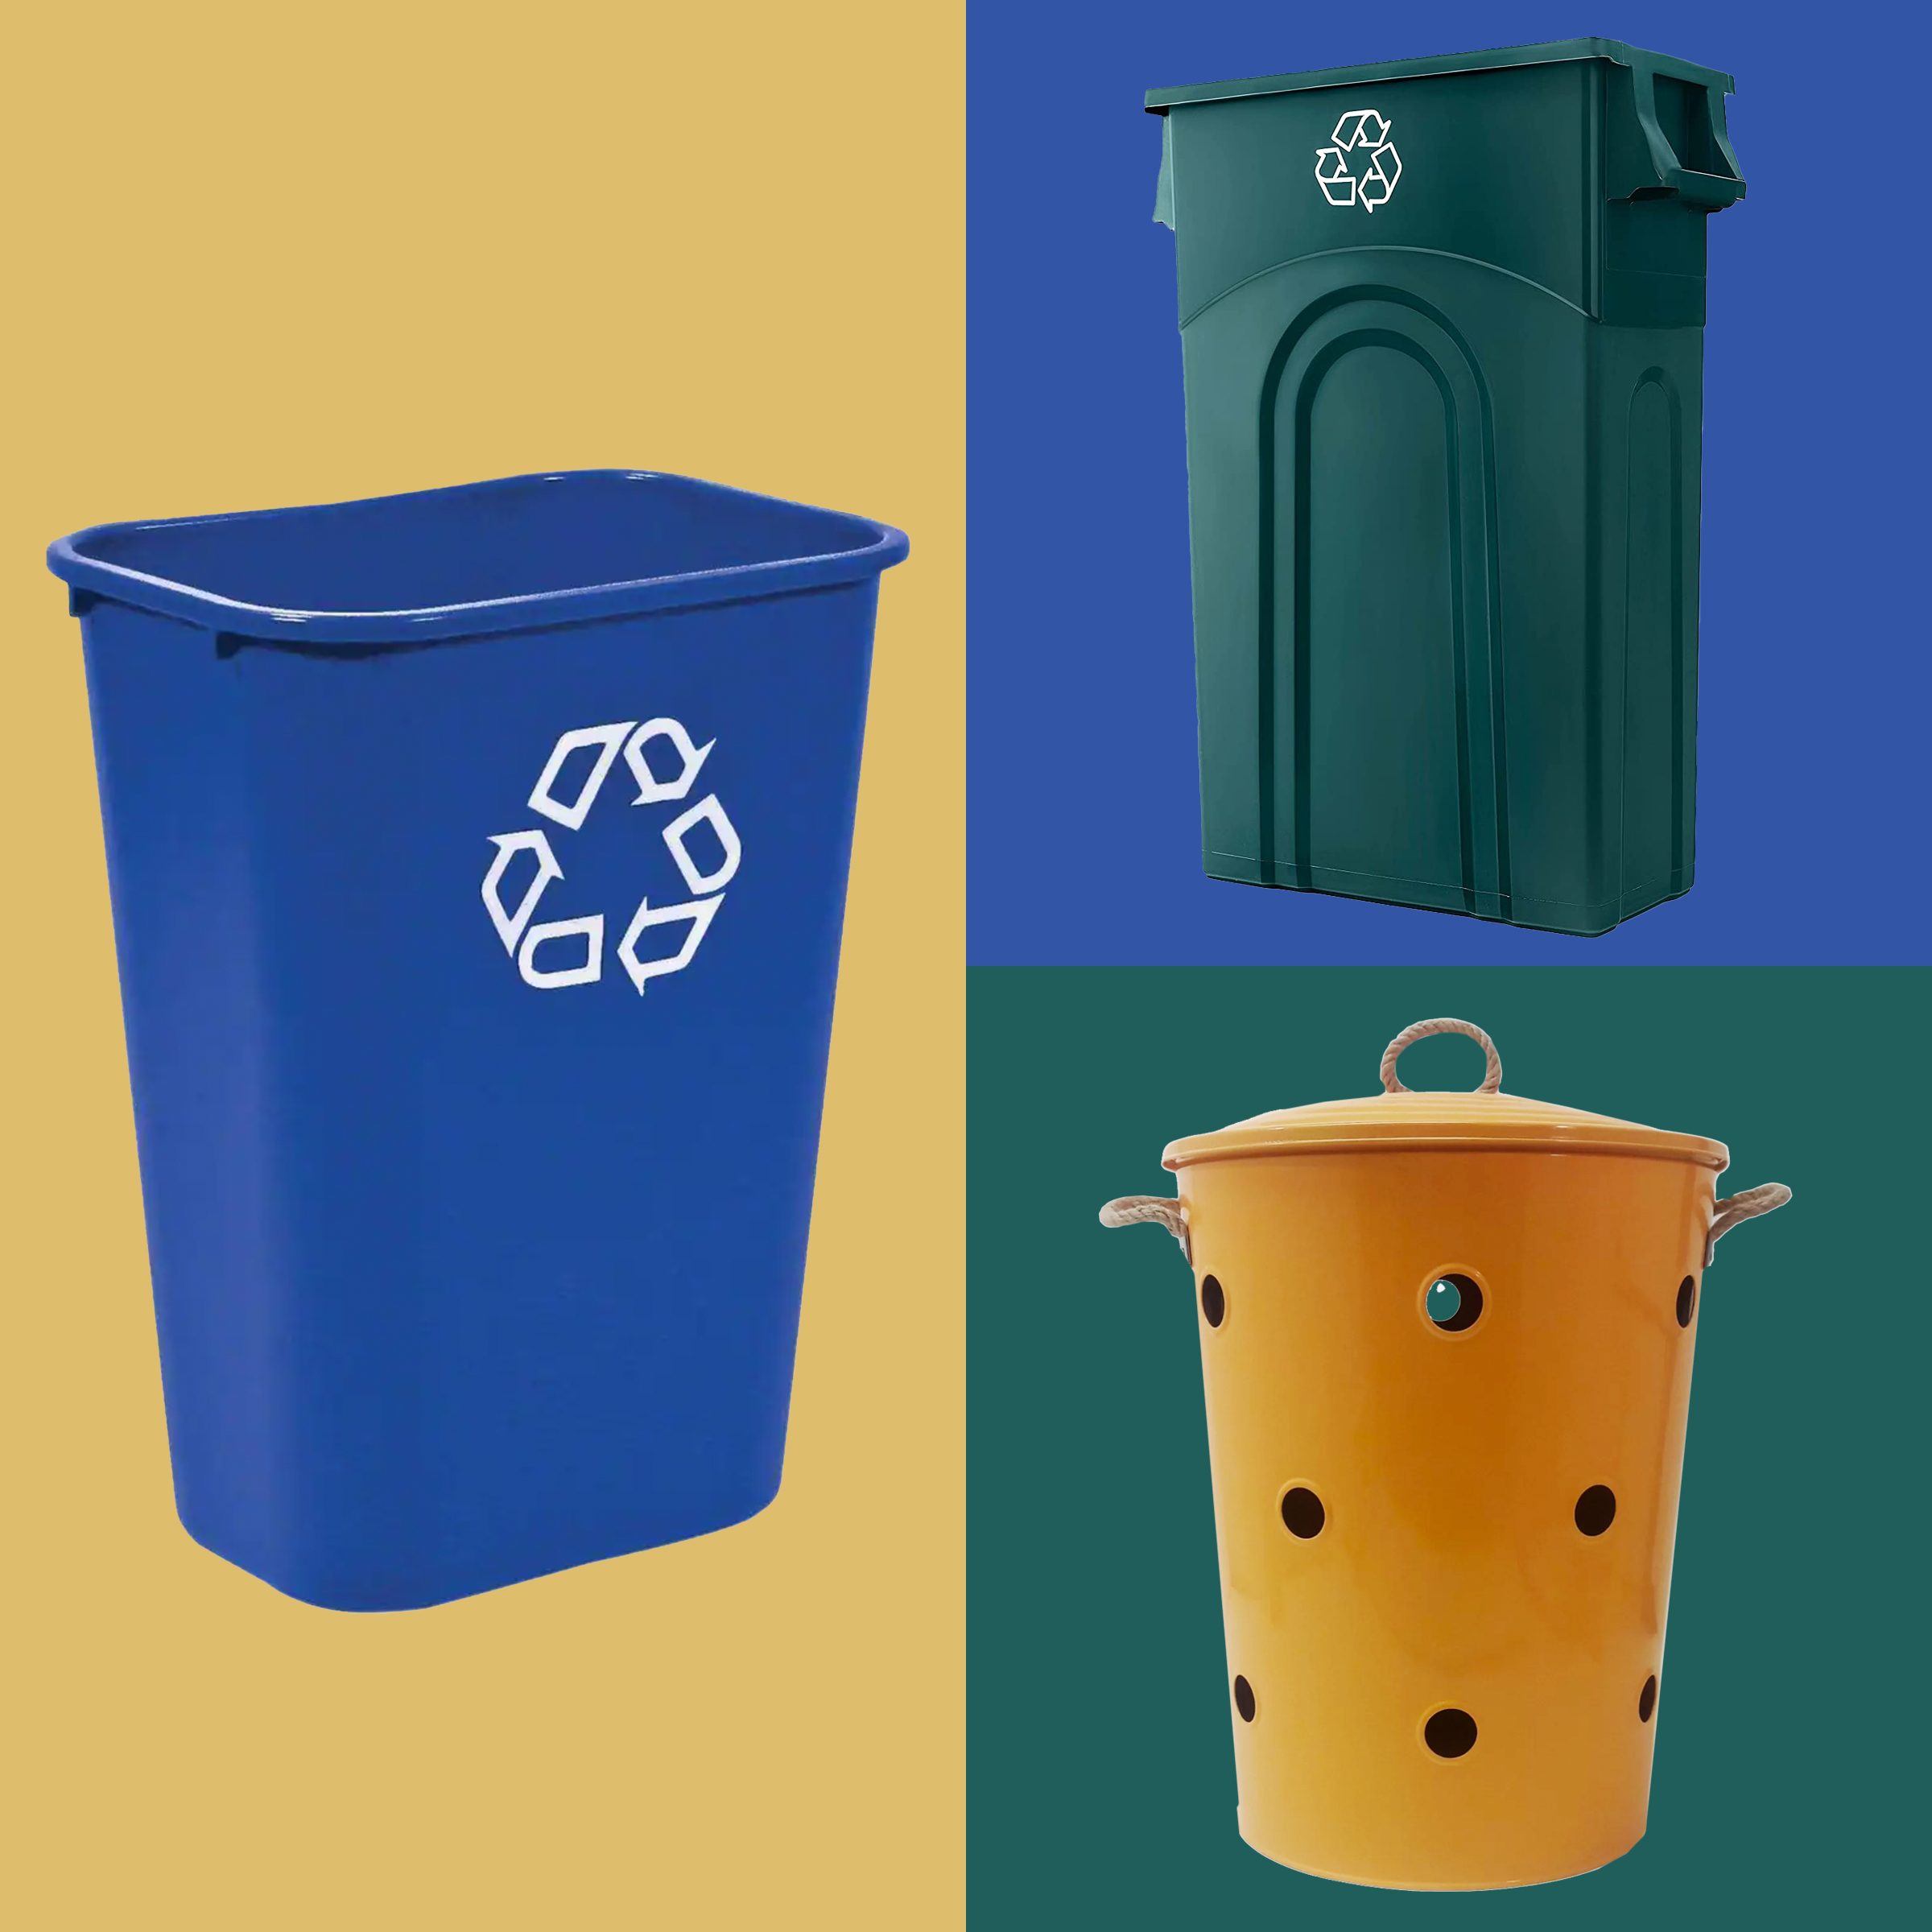 Helping Kids Learn to Reduce, Reuse and Recycle - Oak Disposal